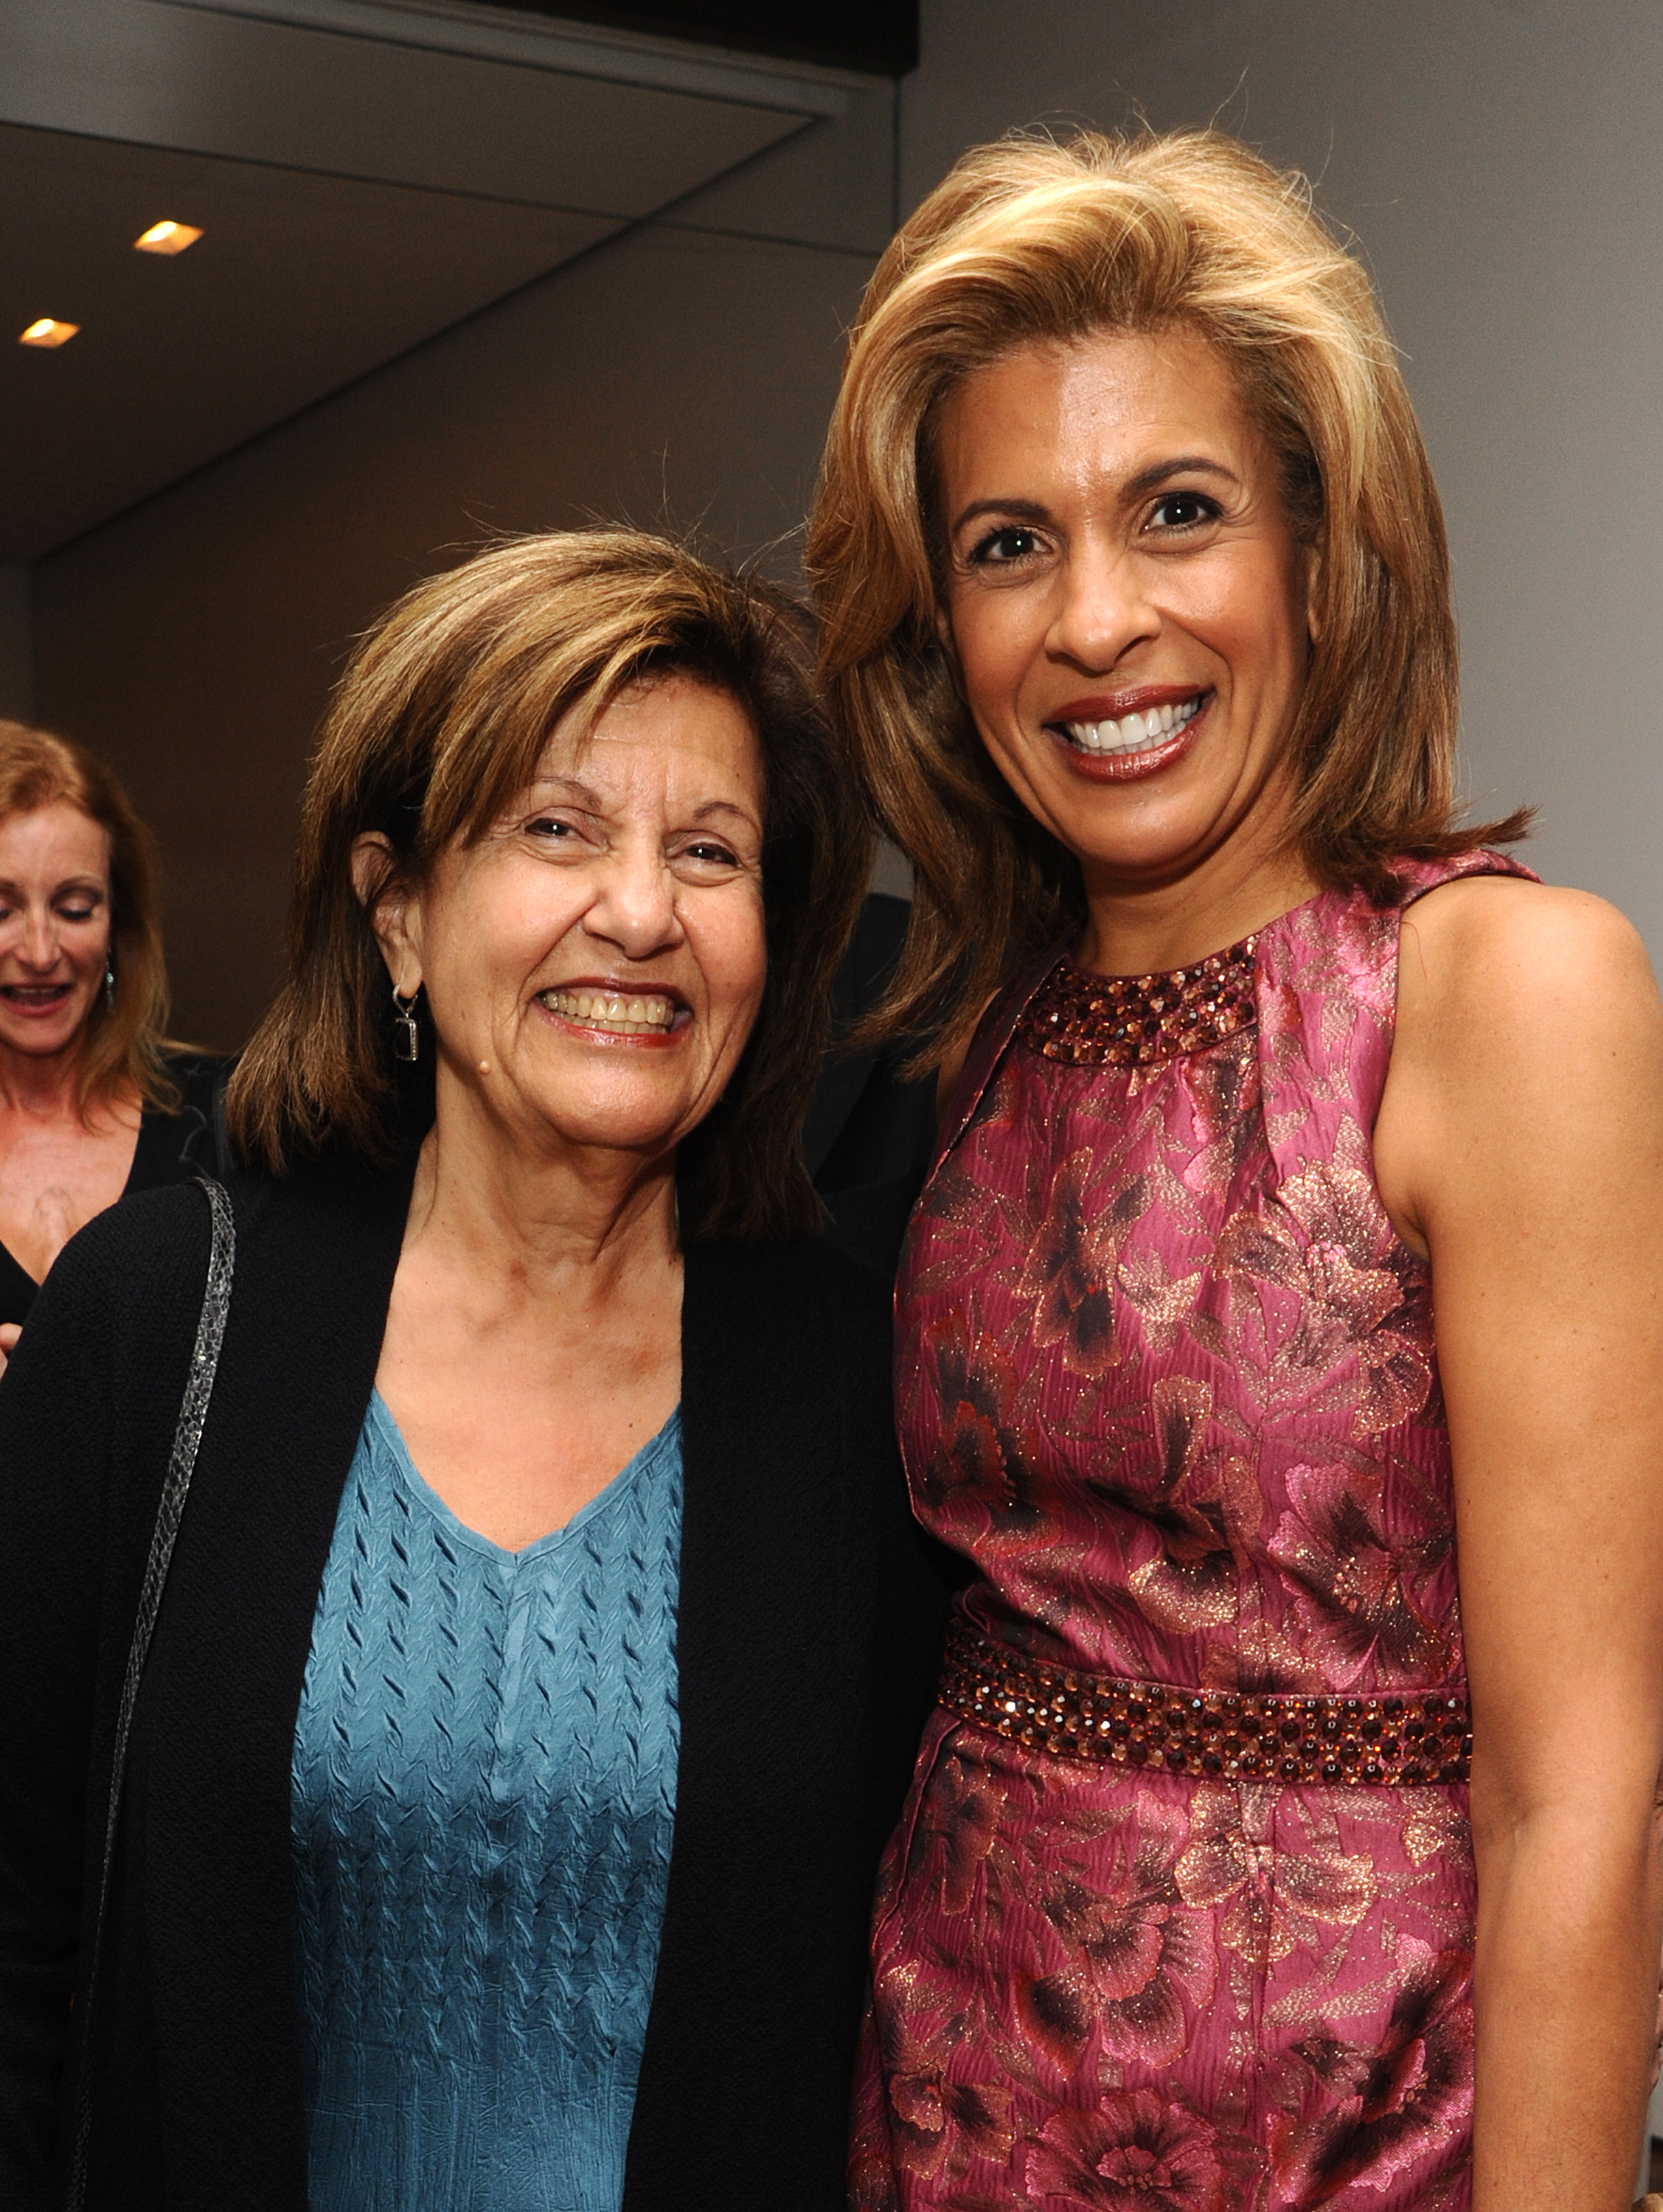 Hoda Kotb and her mother, Sameha Kotb, at the former's book launch party on October 11, 2010, in New York City | Source: Getty Images